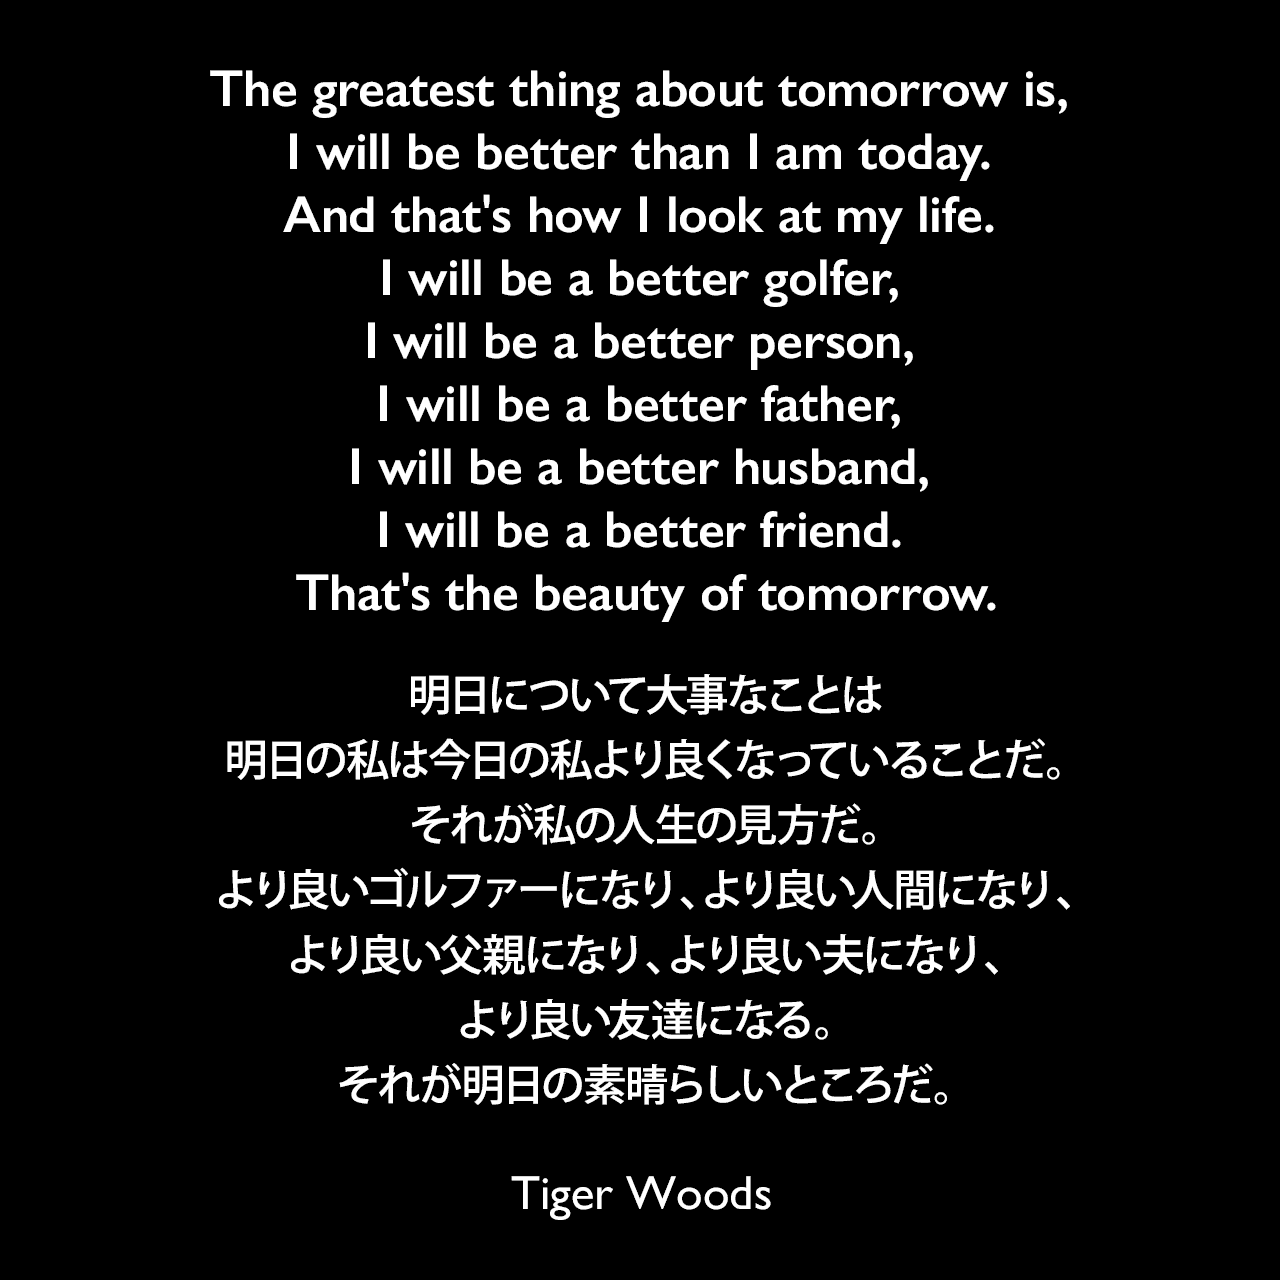 The greatest thing about tomorrow is, I will be better than I am today. And that’s how I look at my life. I will be a better golfer, I will be a better person, I will be a better father, I will be a better husband, I will be a better friend. That’s the beauty of tomorrow.明日について大事なことは、明日の私は今日の私より良くなっていることだ。それが私の人生の見方だ。より良いゴルファーになり、より良い人間になり、より良い父親になり、より良い夫になり、より良い友達になる。それが明日の素晴らしいところだ。